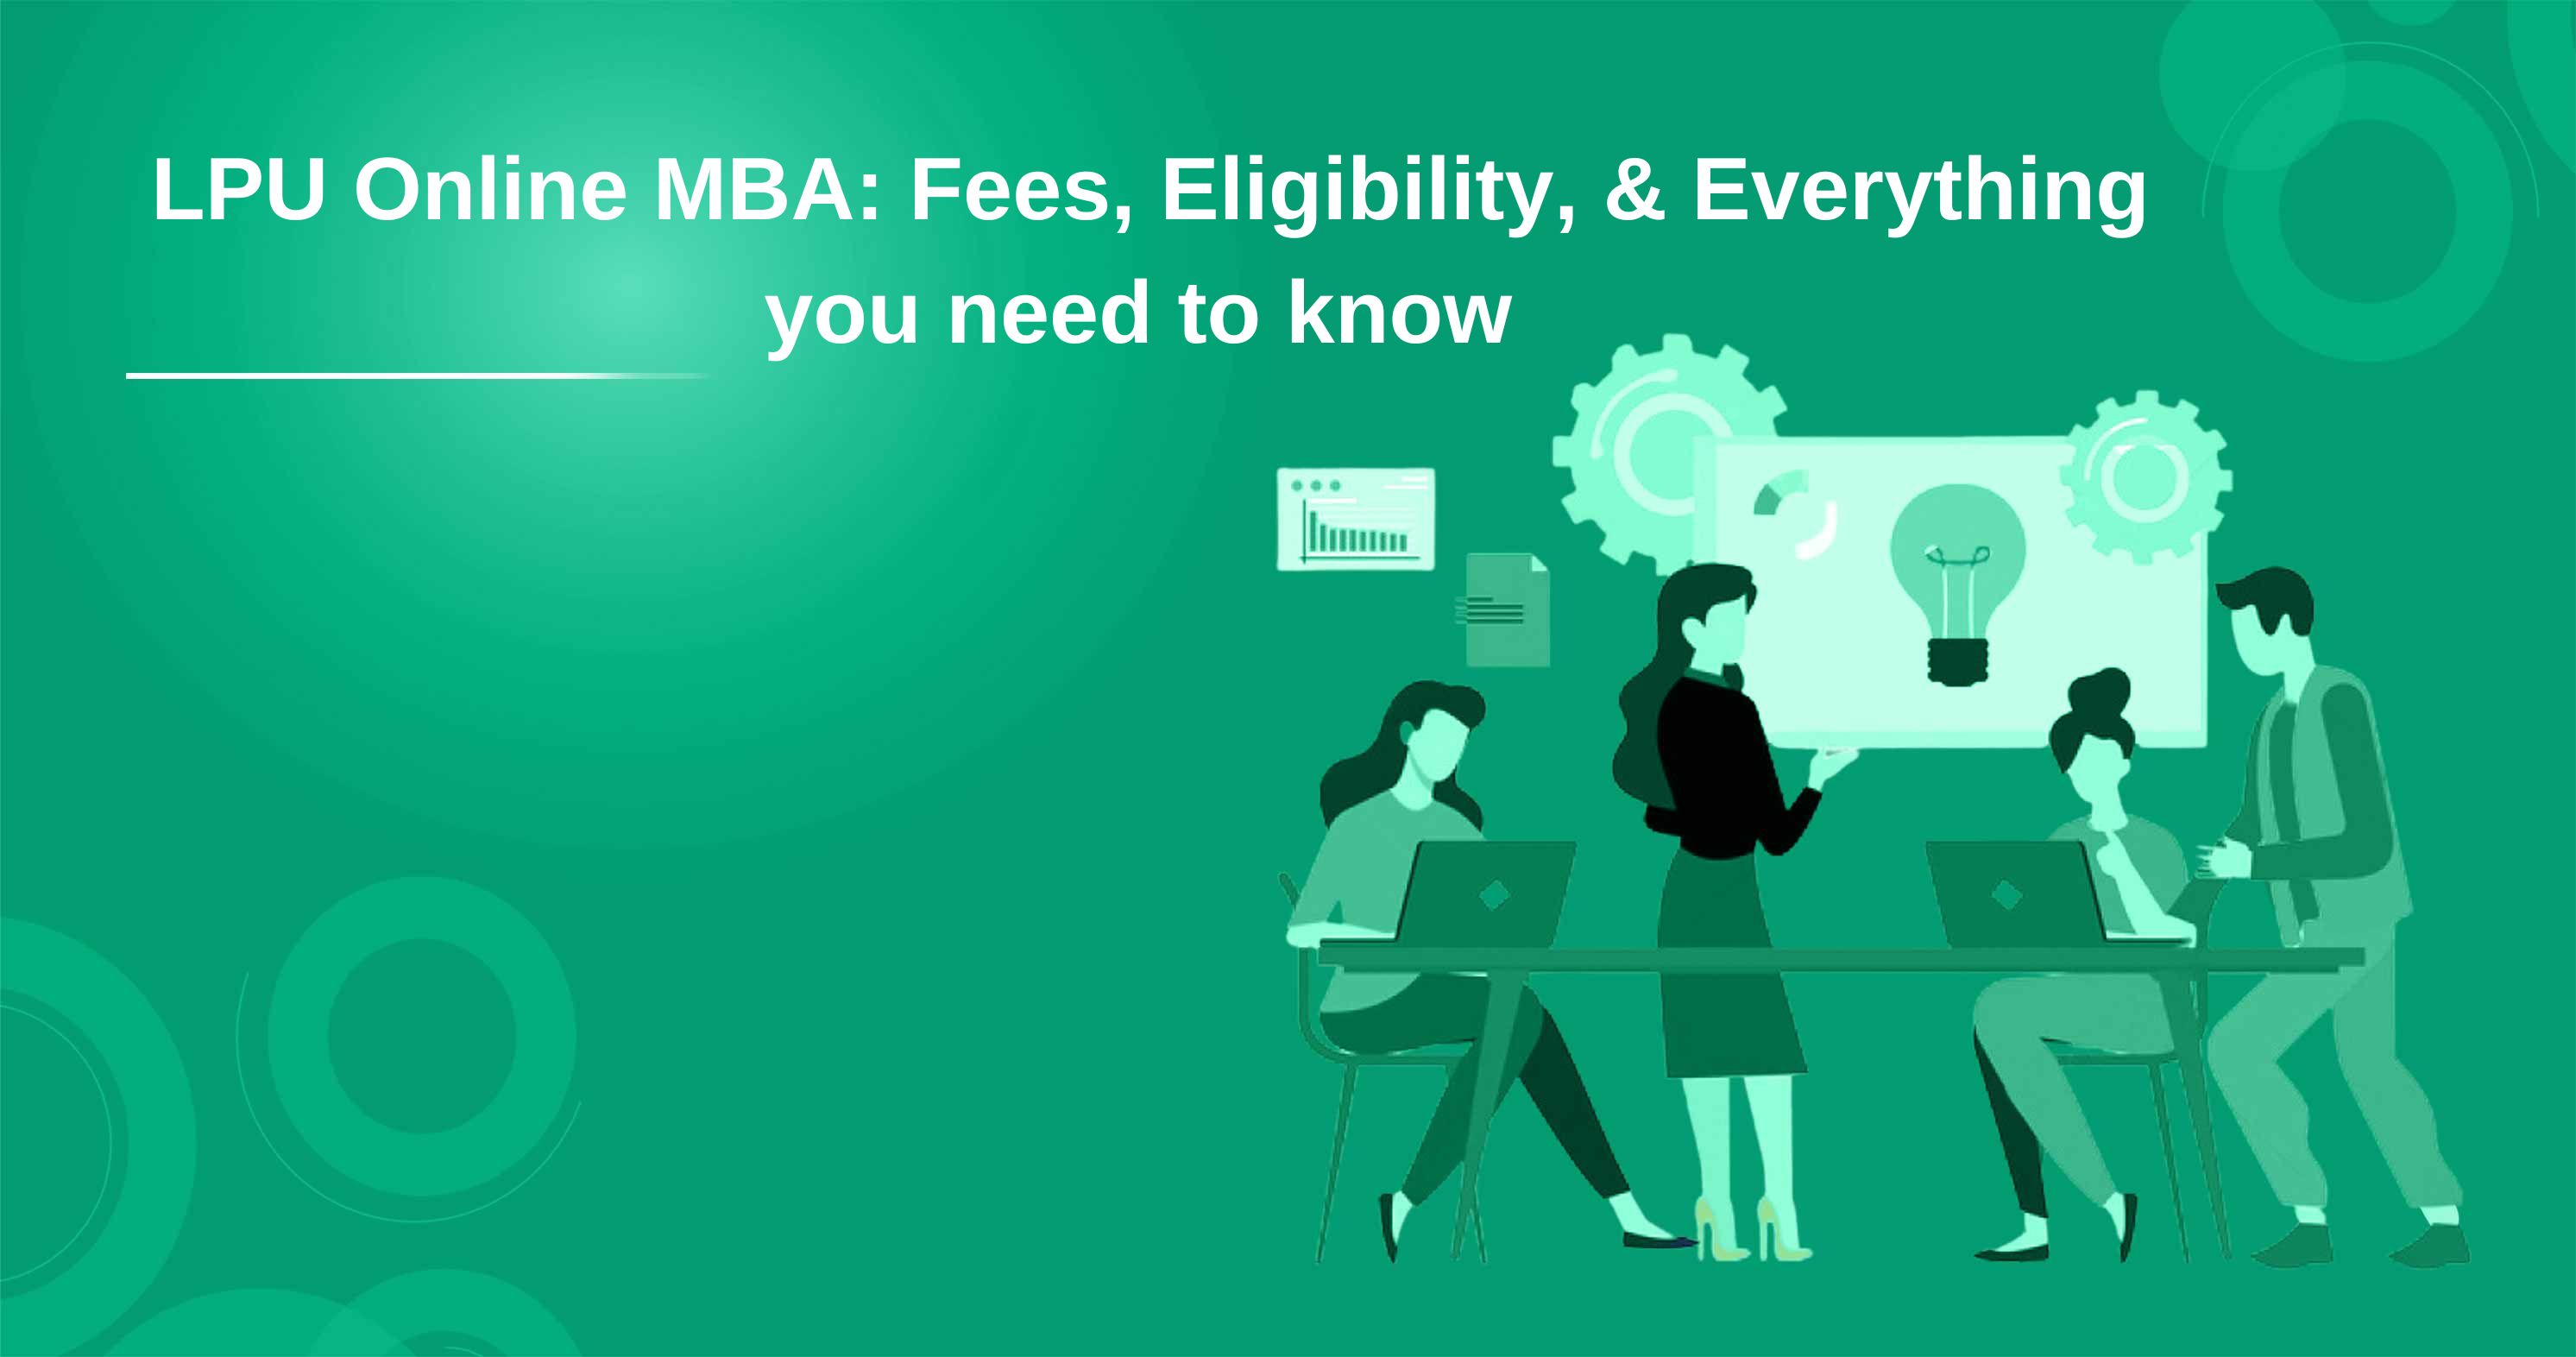 LPU Online MBA: Fees, Eligibility, & Everything you need to know